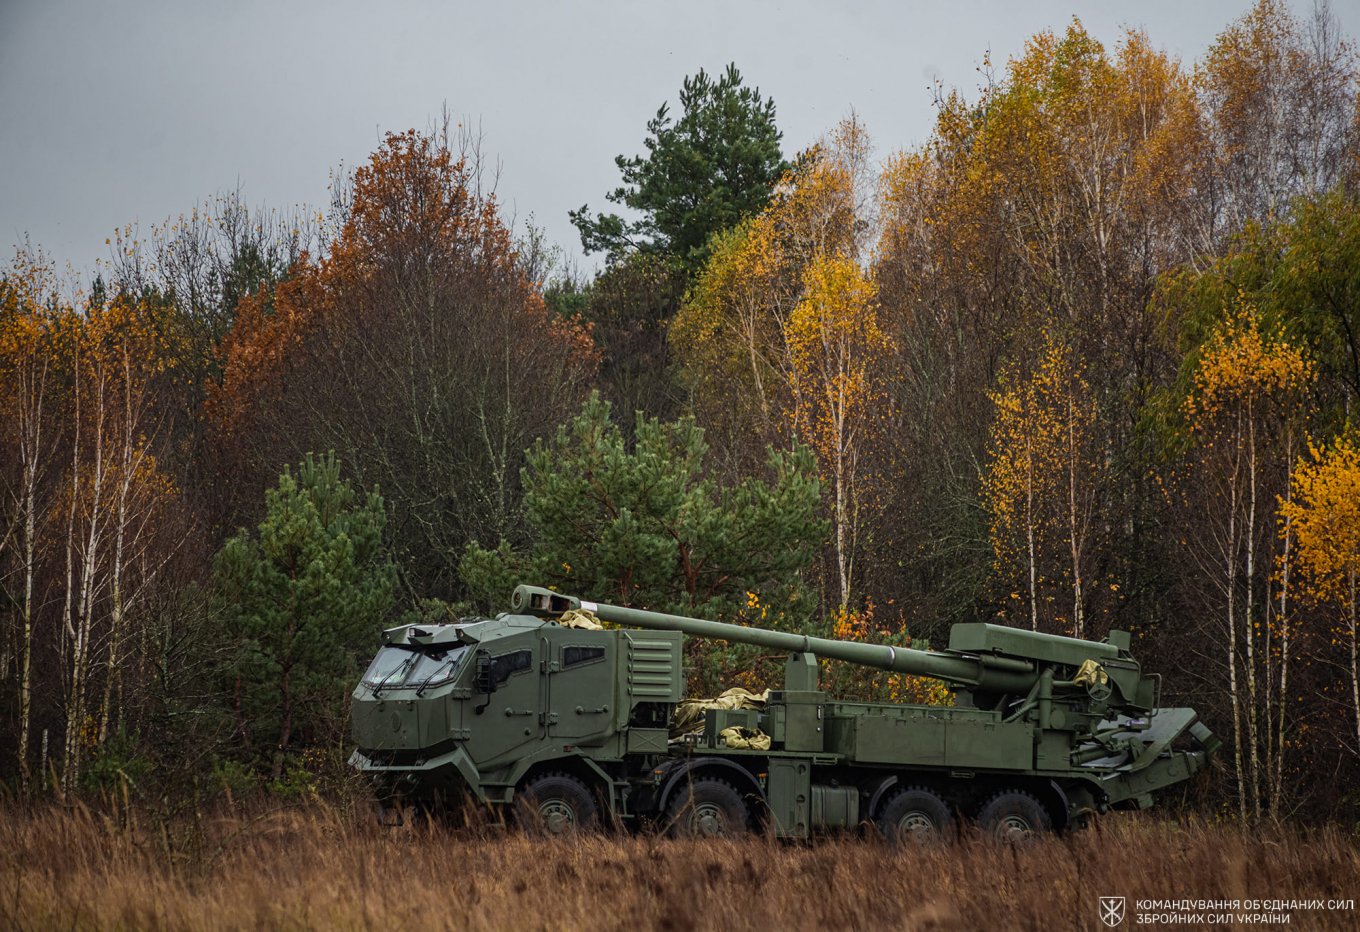 2S22 Bohdana onTatra chassis / Defense Express / Ukraine's Bohdana 155mm Howitzer Production Rate Doubled and Keeps Growing